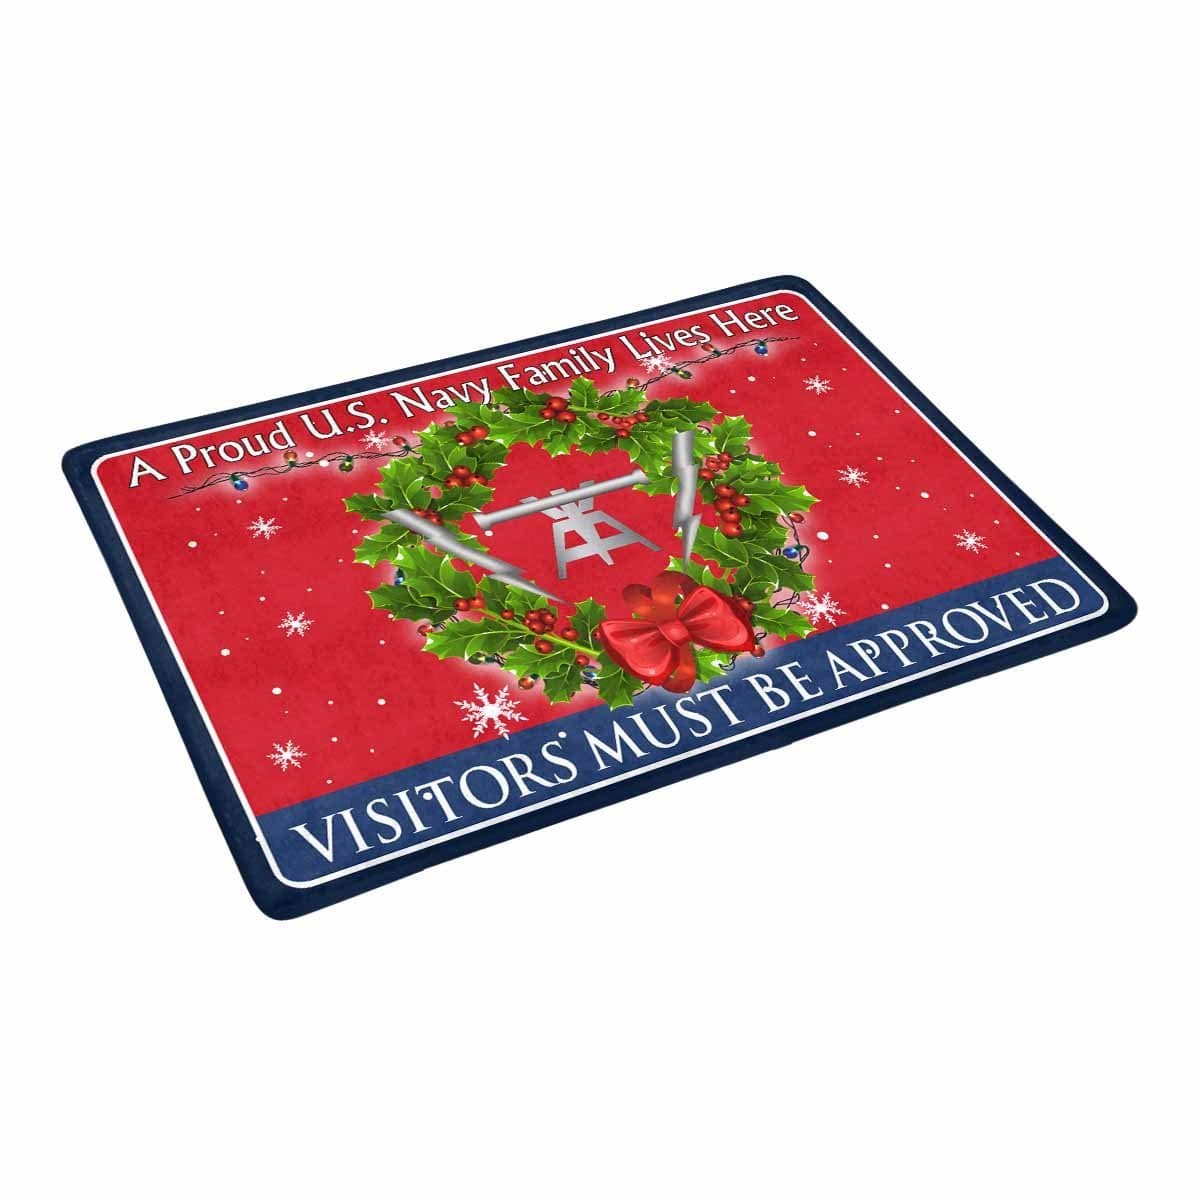 US Navy Fire Controlman Navy FC - Visitors must be approved-Doormat-Navy-Rate-Veterans Nation